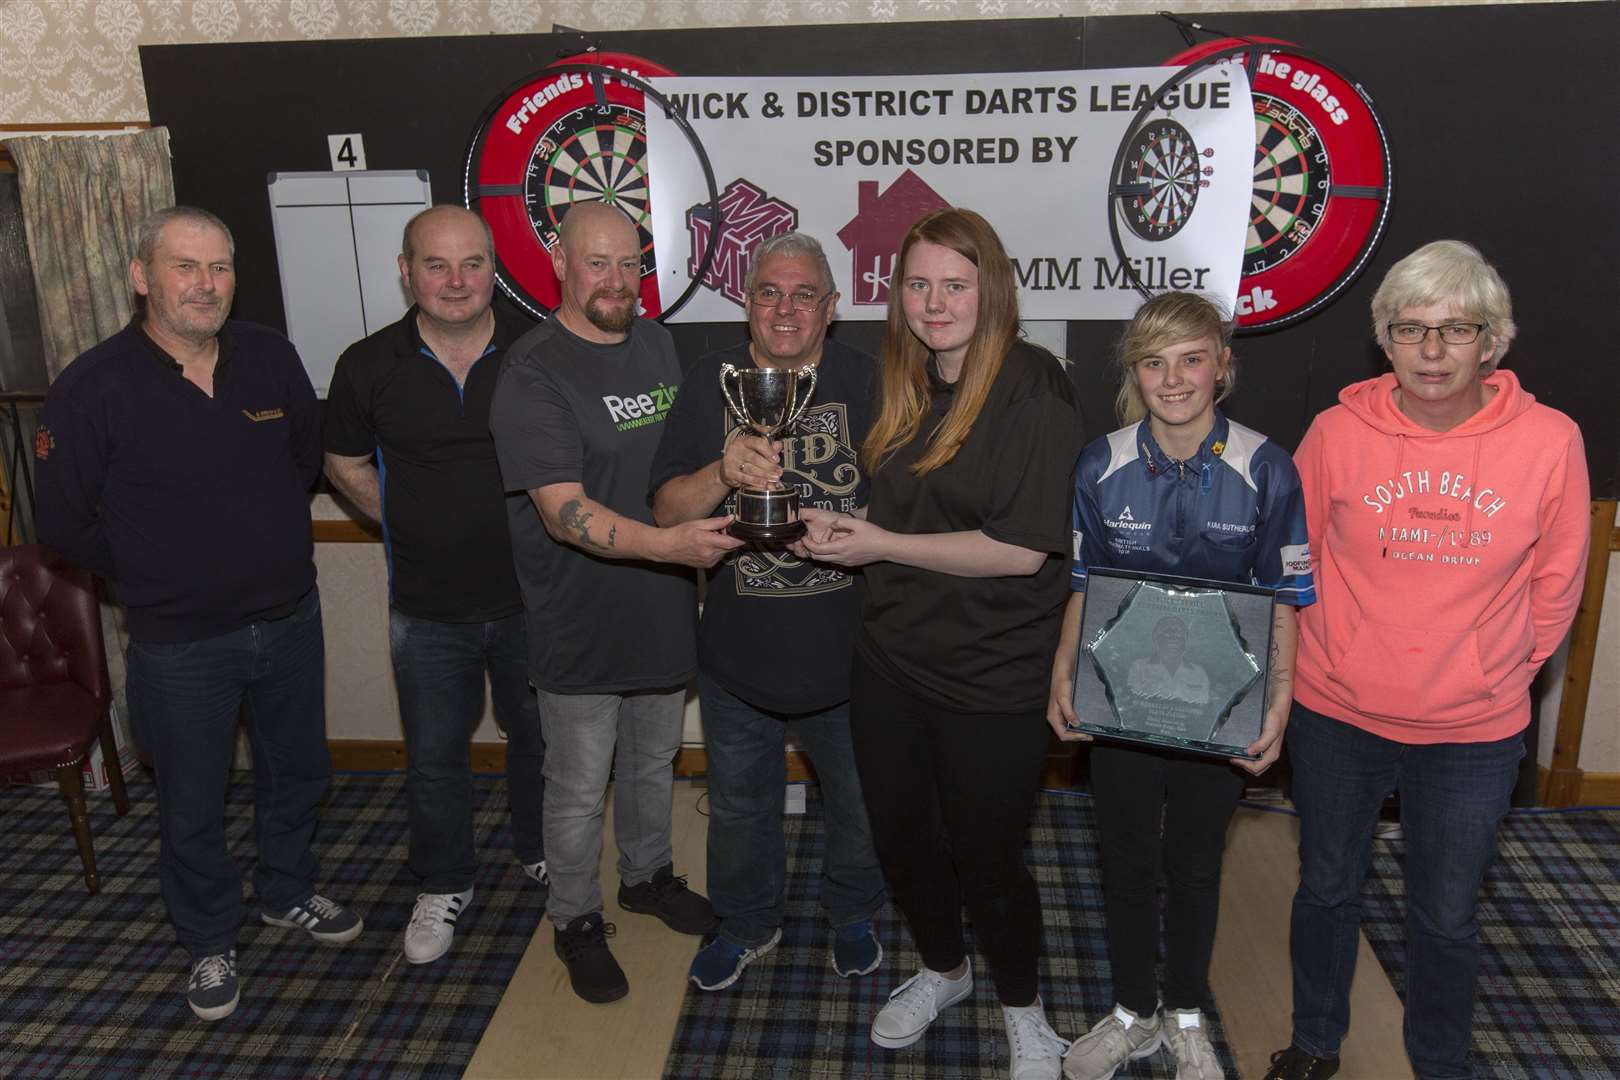 Wick and District Darts League's Colin Perry Memorial Cup for men's pairs is presented by his daughter, Morgan, to Jocky Plowman (centre) and Kevin Donald, Queen's 2. Runners-up were David Taylor (left) and Alan Nicolson, Harper's B. The Alice Coghill Memorial Trophy for ladies' singles was won by Kara Sutherland, with Freda Perry runner-up, both Queen's. The competitions were played on Tuesday in the Seaforth Highlanders' Club. Picture: Robert MacDonald / Northern Studios